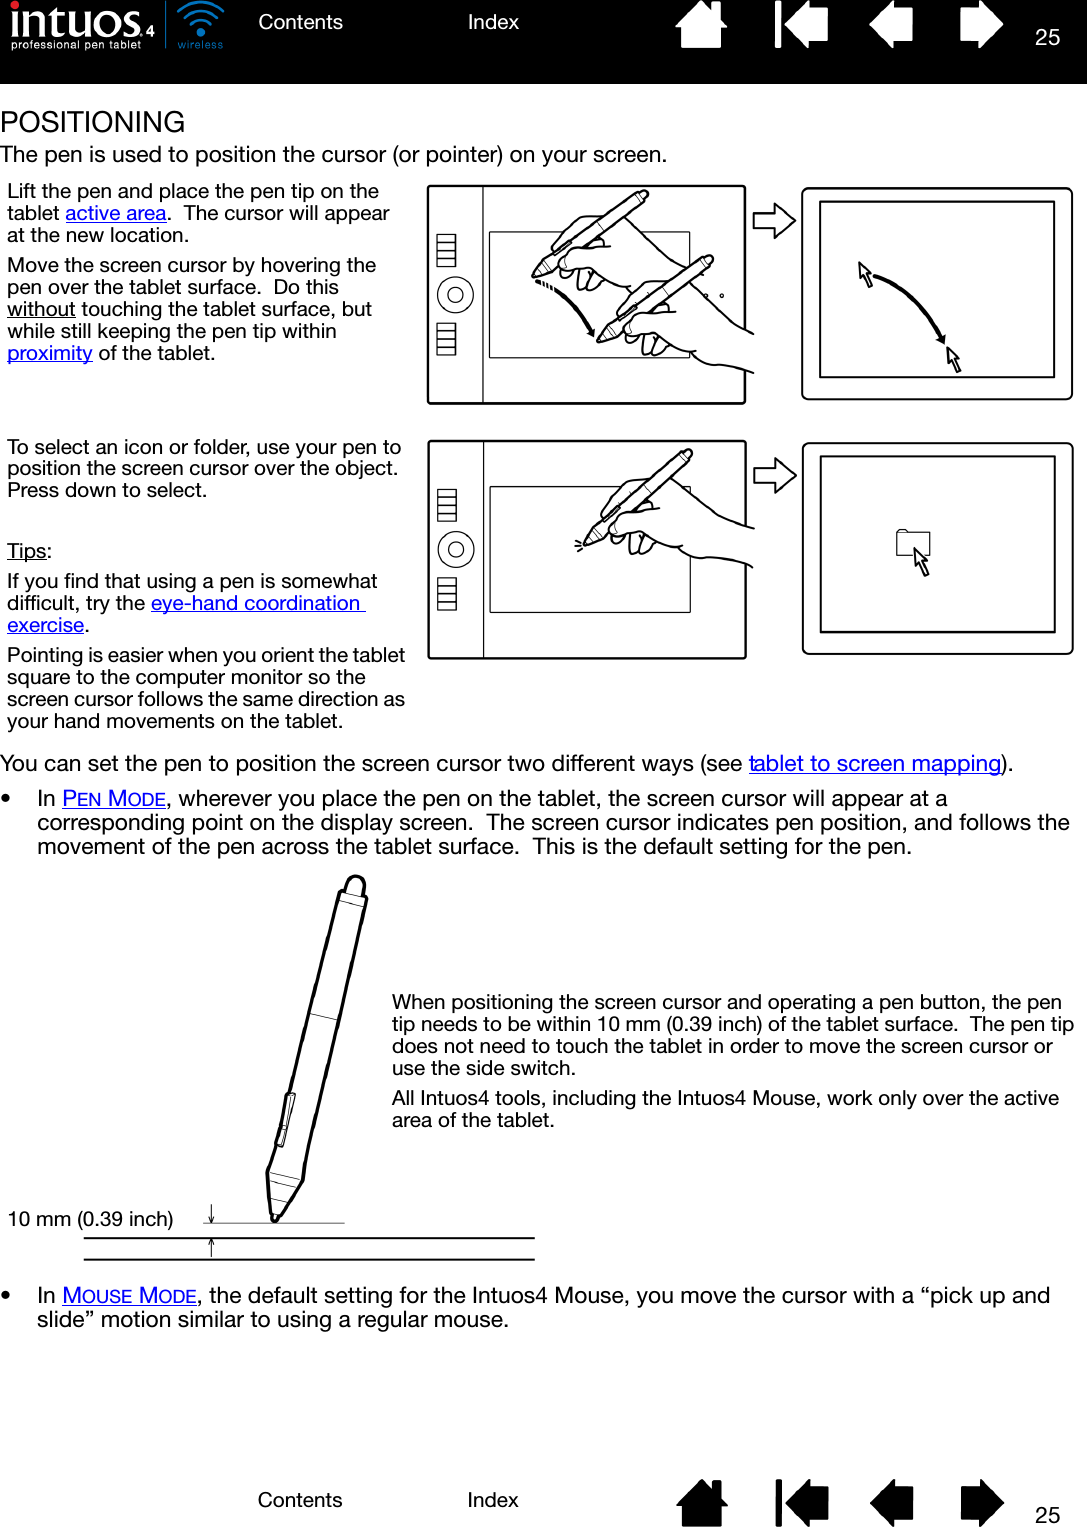 25IndexContents25IndexContentsPOSITIONINGThe pen is used to position the cursor (or pointer) on your screen.You can set the pen to position the screen cursor two different ways (see tablet to screen mapping).•In PEN MODE, wherever you place the pen on the tablet, the screen cursor will appear at a corresponding point on the display screen.  The screen cursor indicates pen position, and follows the movement of the pen across the tablet surface.  This is the default setting for the pen.•In MOUSE MODE, the default setting for the Intuos4 Mouse, you move the cursor with a “pick up and slide” motion similar to using a regular mouse.Lift the pen and place the pen tip on the tablet active area.  The cursor will appear at the new location.Move the screen cursor by hovering the pen over the tablet surface.  Do this without touching the tablet surface, but while still keeping the pen tip within proximity of the tablet.To select an icon or folder, use your pen to position the screen cursor over the object.  Press down to select.Tips: If you find that using a pen is somewhat difficult, try the eye-hand coordination exercise.Pointing is easier when you orient the tablet square to the computer monitor so the screen cursor follows the same direction as your hand movements on the tablet.10 mm (0.39 inch)When positioning the screen cursor and operating a pen button, the pen tip needs to be within 10 mm (0.39 inch) of the tablet surface.  The pen tip does not need to touch the tablet in order to move the screen cursor or use the side switch.All Intuos4 tools, including the Intuos4 Mouse, work only over the active area of the tablet.